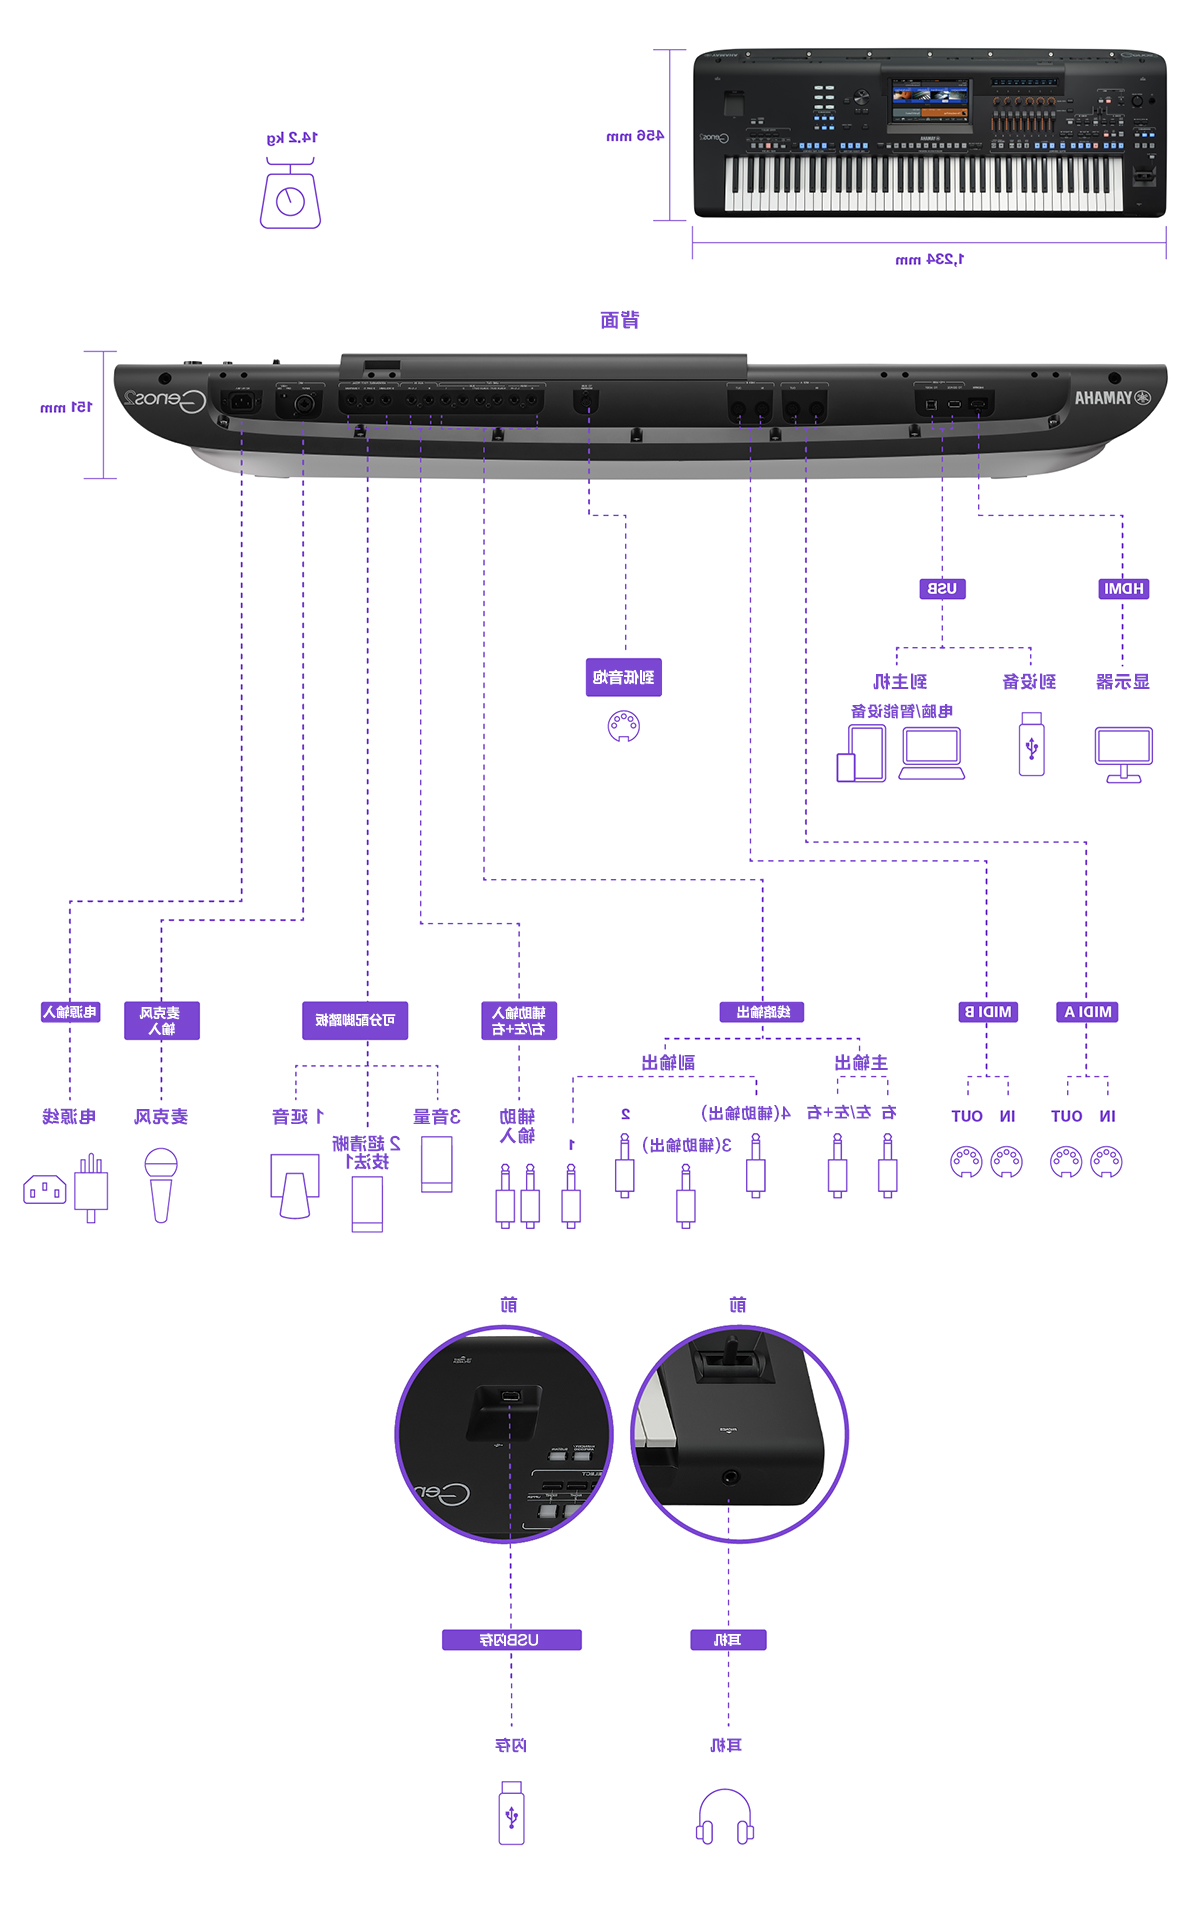 Diagram showing Genos2 dimensions, weight, and rear connection terminals. Please refer to the specifications table for details.